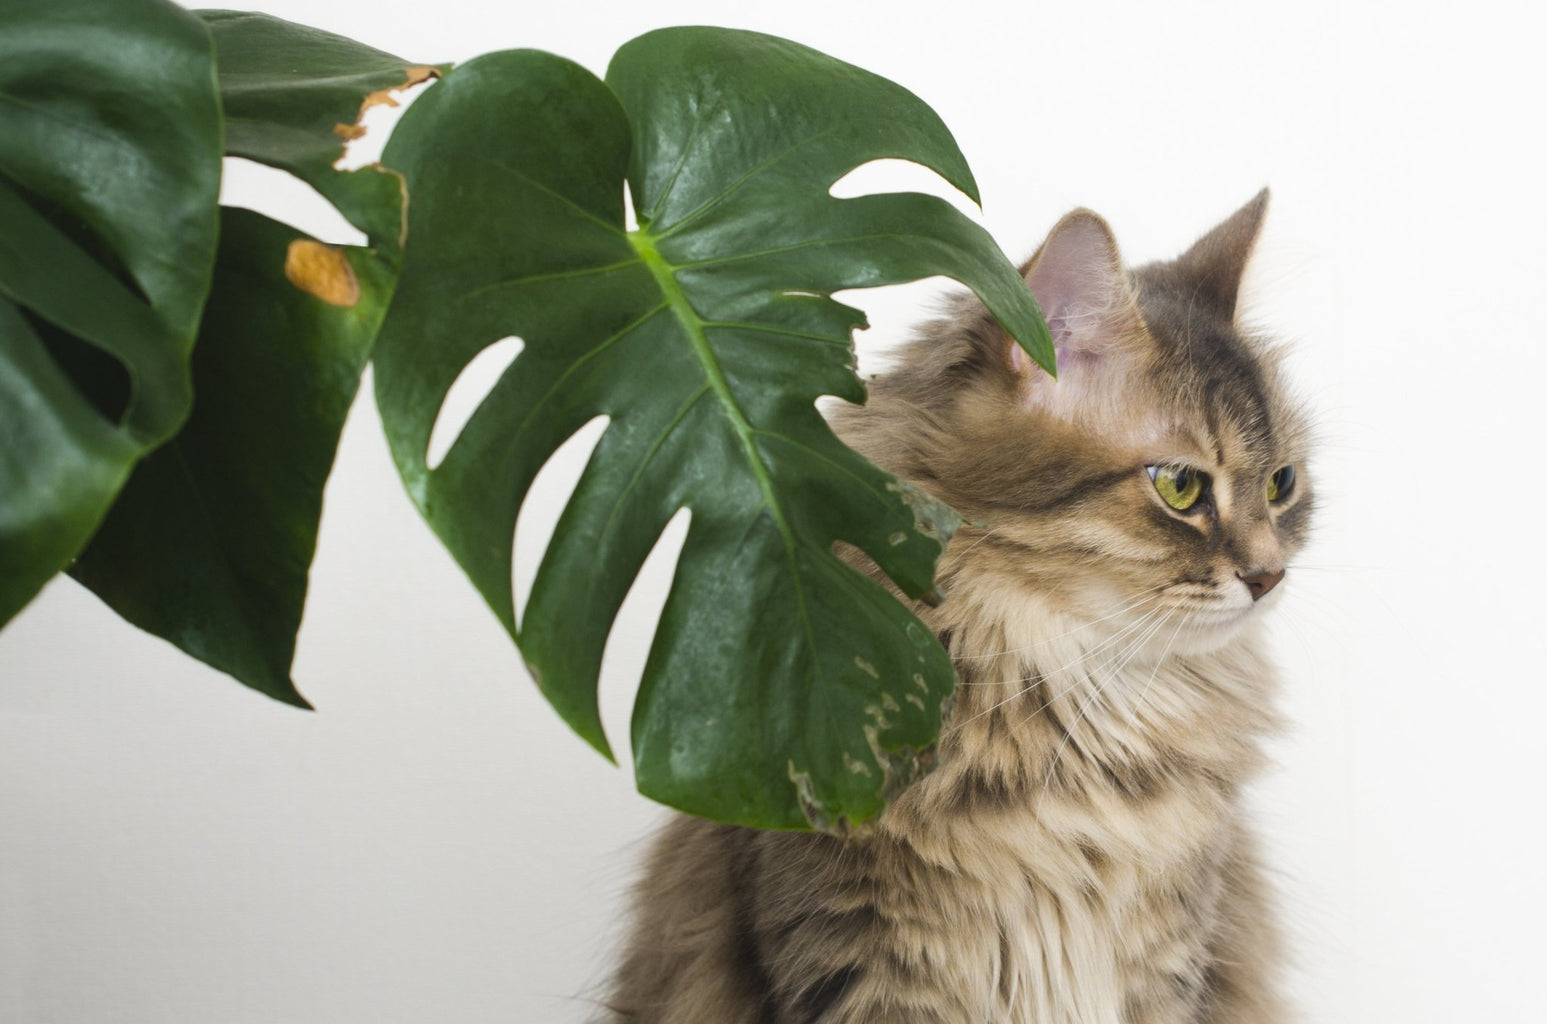 Top 5 houseplants that are safe for cats - Leaf Envy